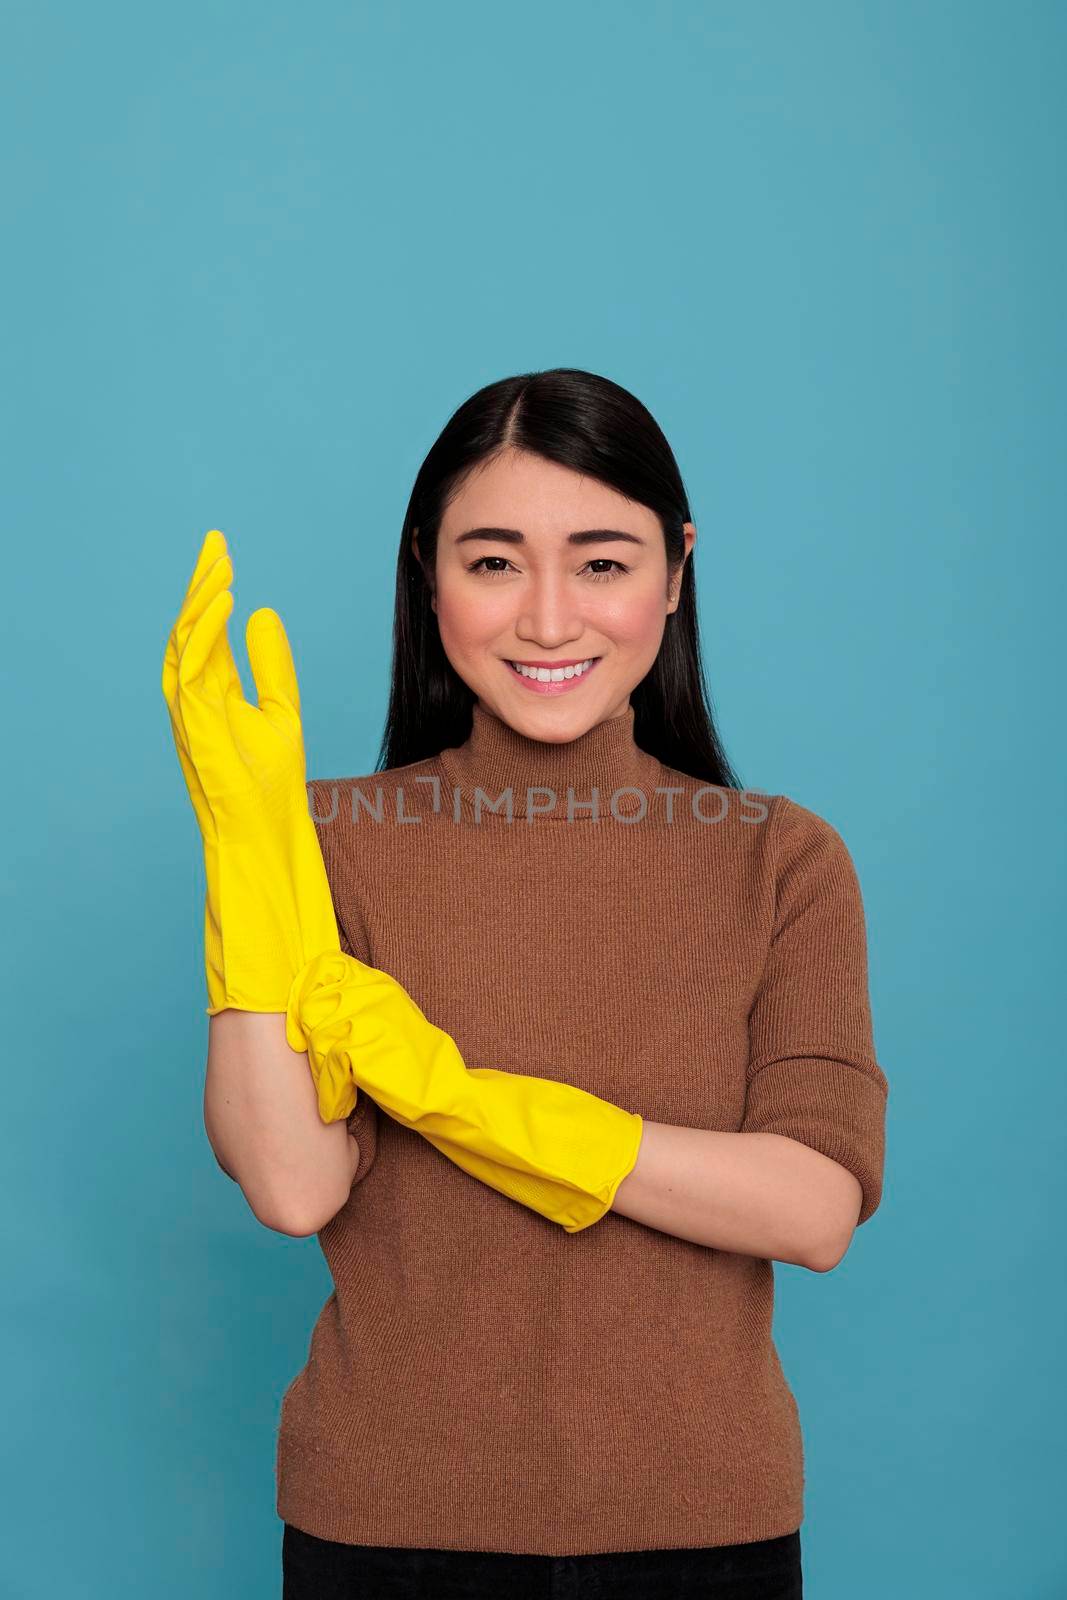 Smiling glad and delighted asian housemaid putting yellow rubber gloves on hand ready to do household duties, Cleaning home concept, Joyful optimistic female from chores positive state of mind